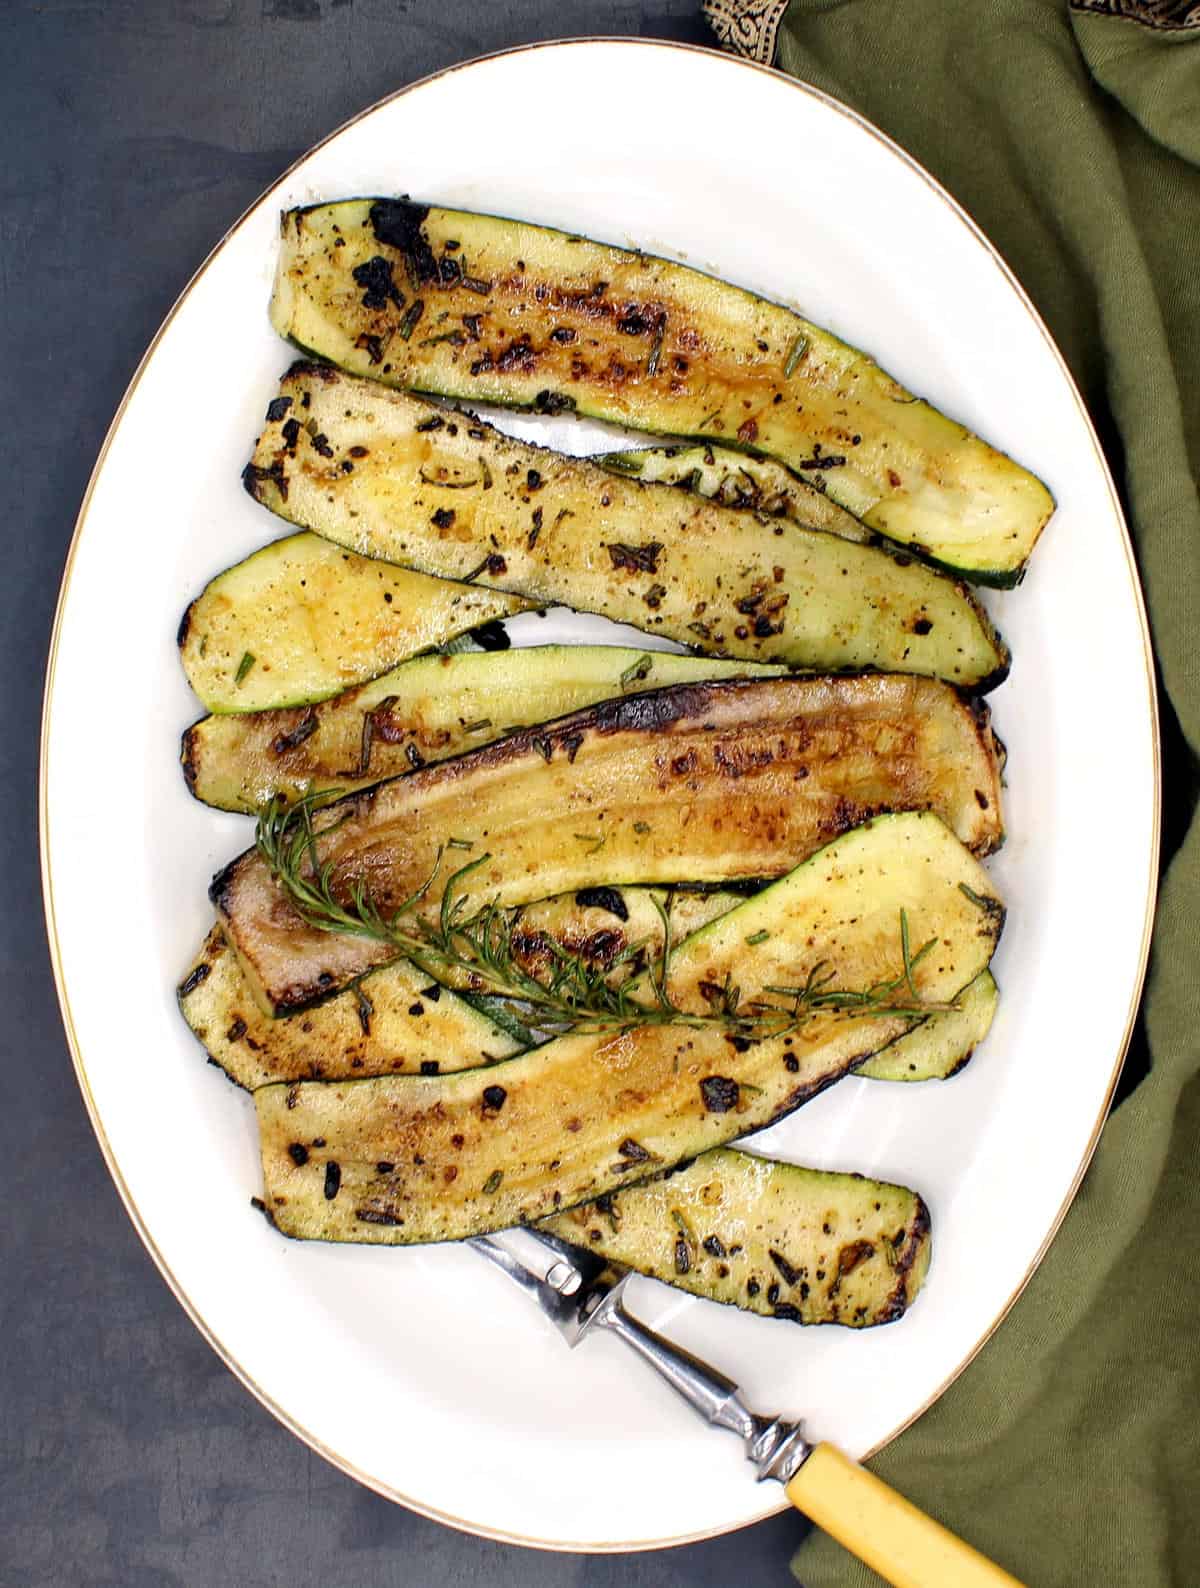 Slices of pan-roasted zucchini arranged in a platter with a steak serving fork,